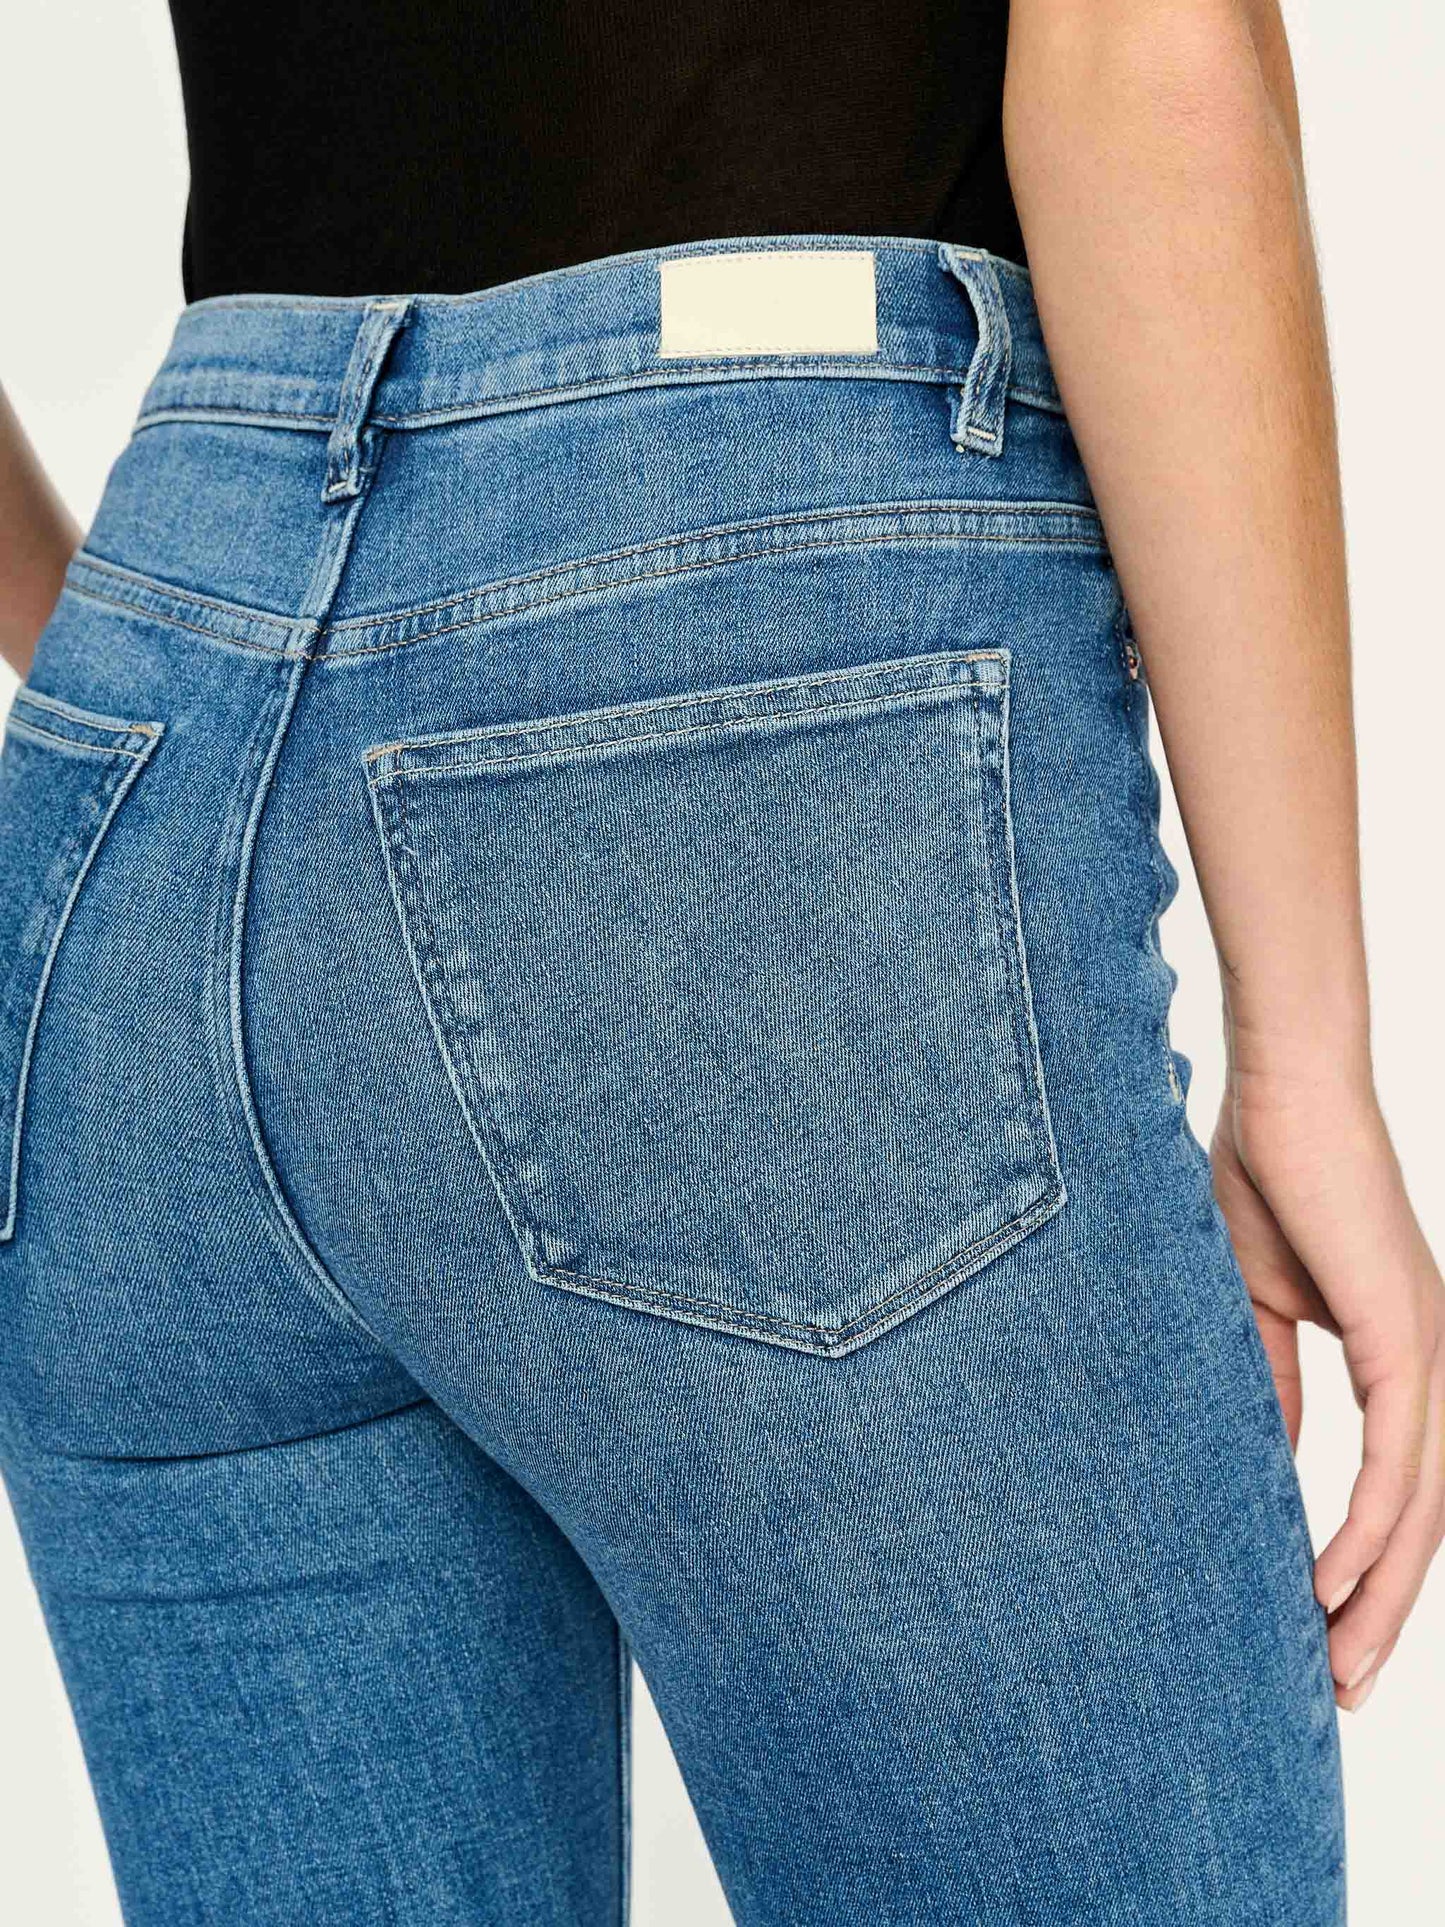 DL1961 - Rachel Flare Ultra High Rise Instasculpt 34" Jeans in Driggs